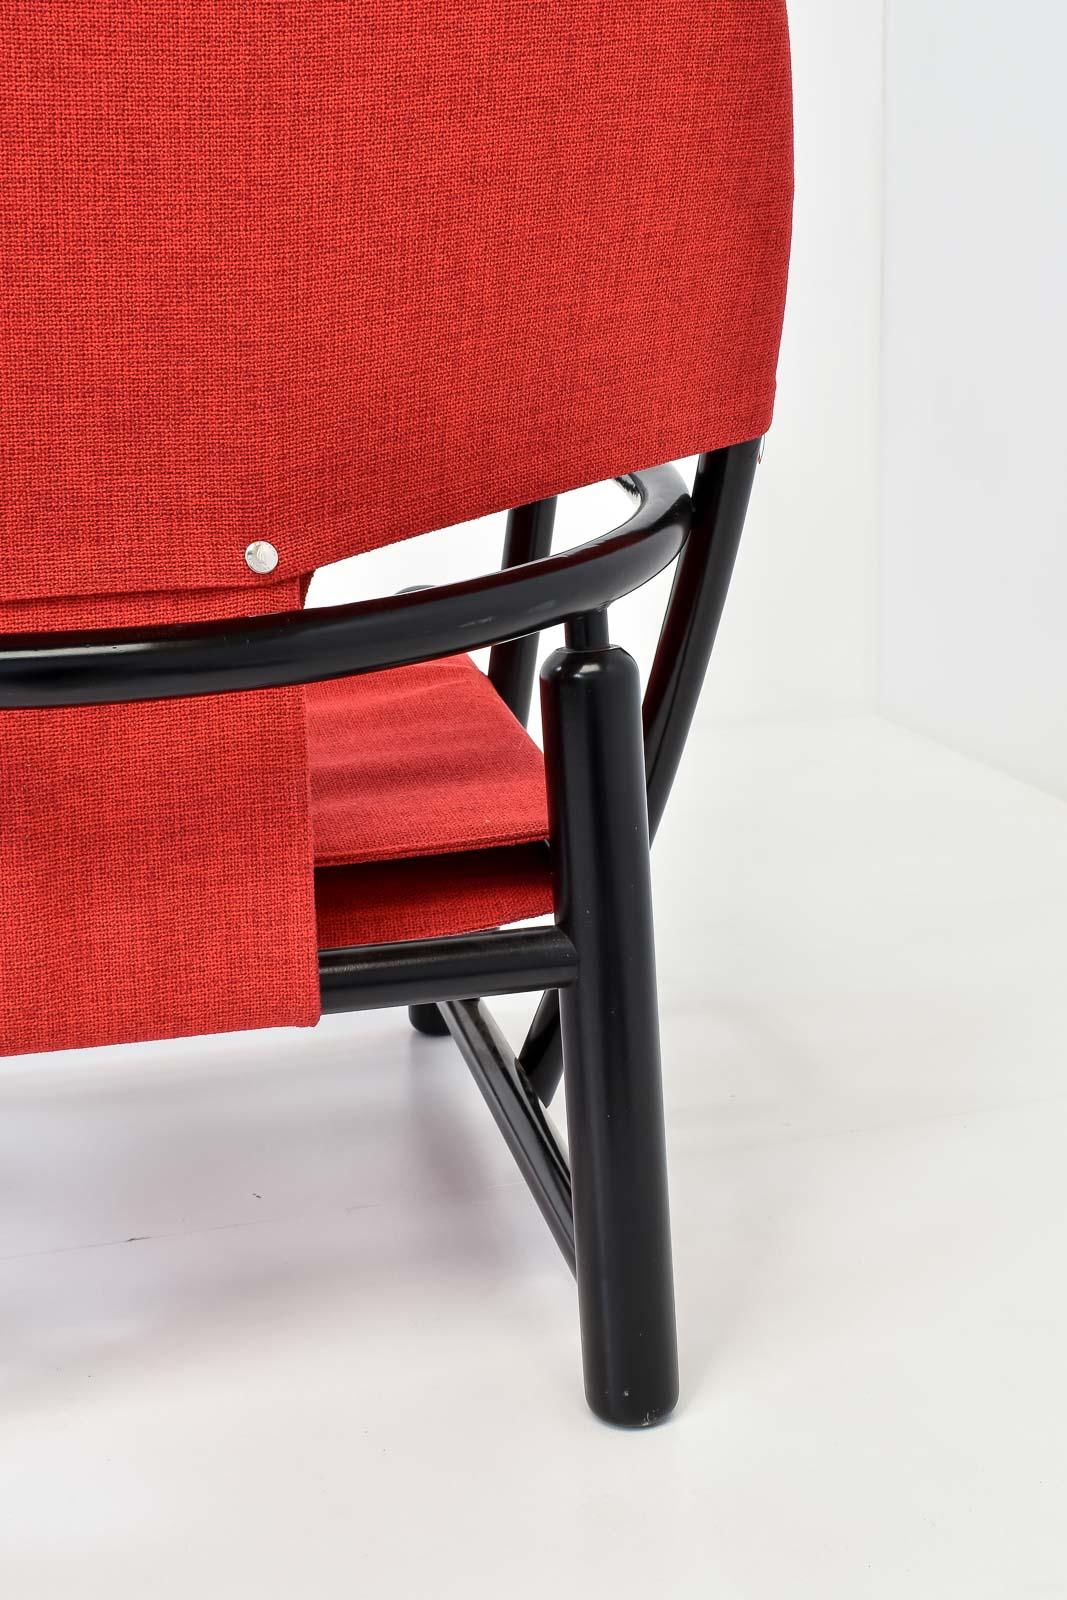 G23 Hoop Chair by Piero Palange & Werther Toffoloni for Germa 3